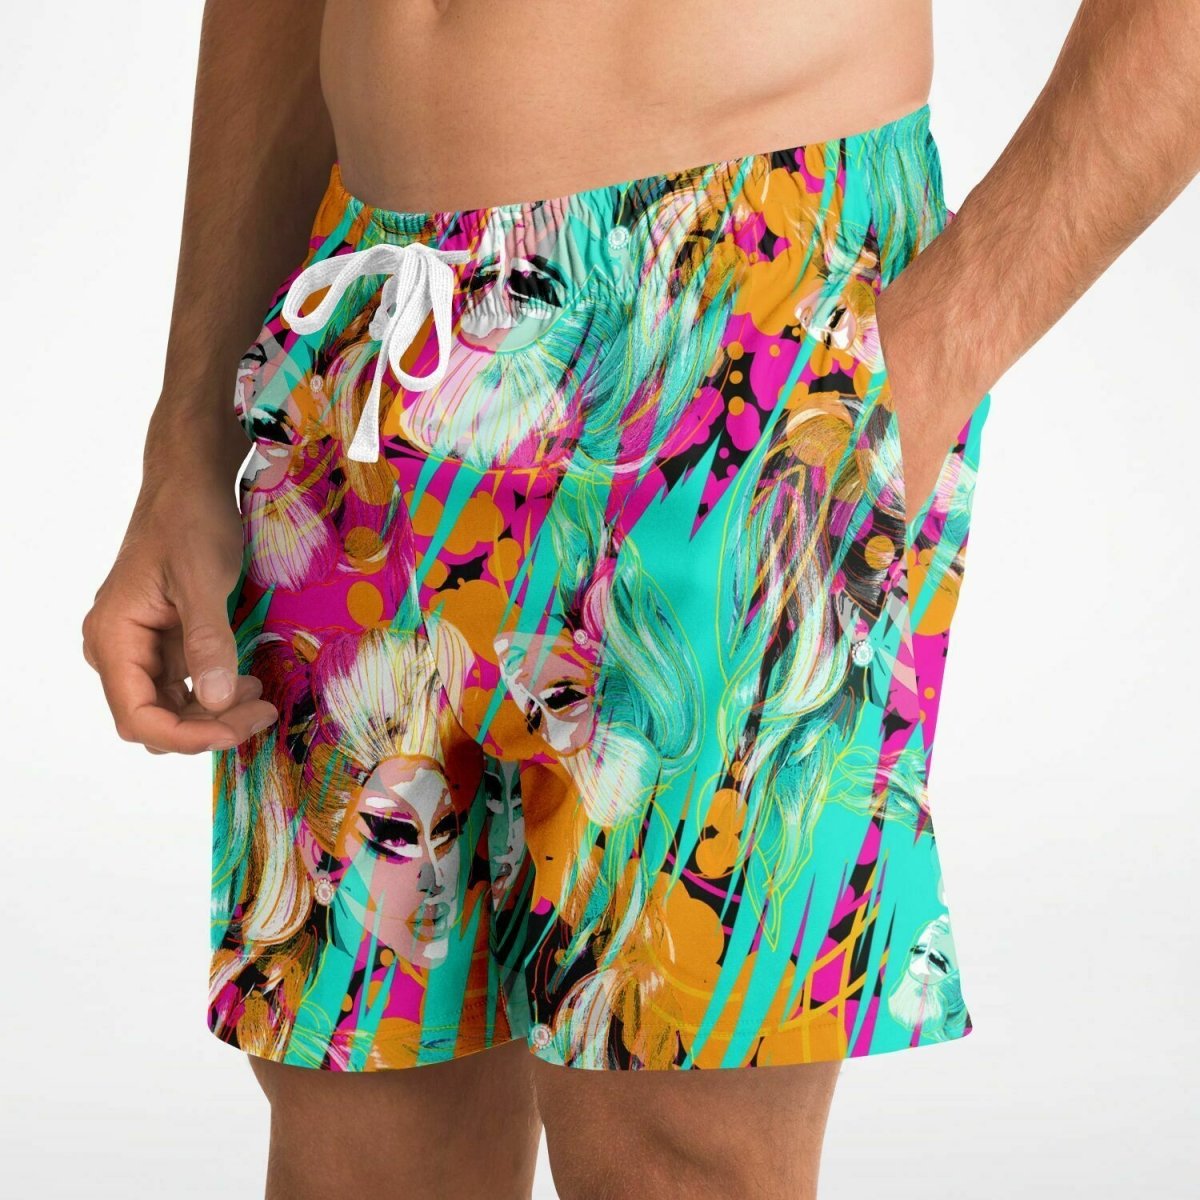 Trixie Mattel "Palm Springs Collection" Drawstring Waist Shorts - dragqueenmerch